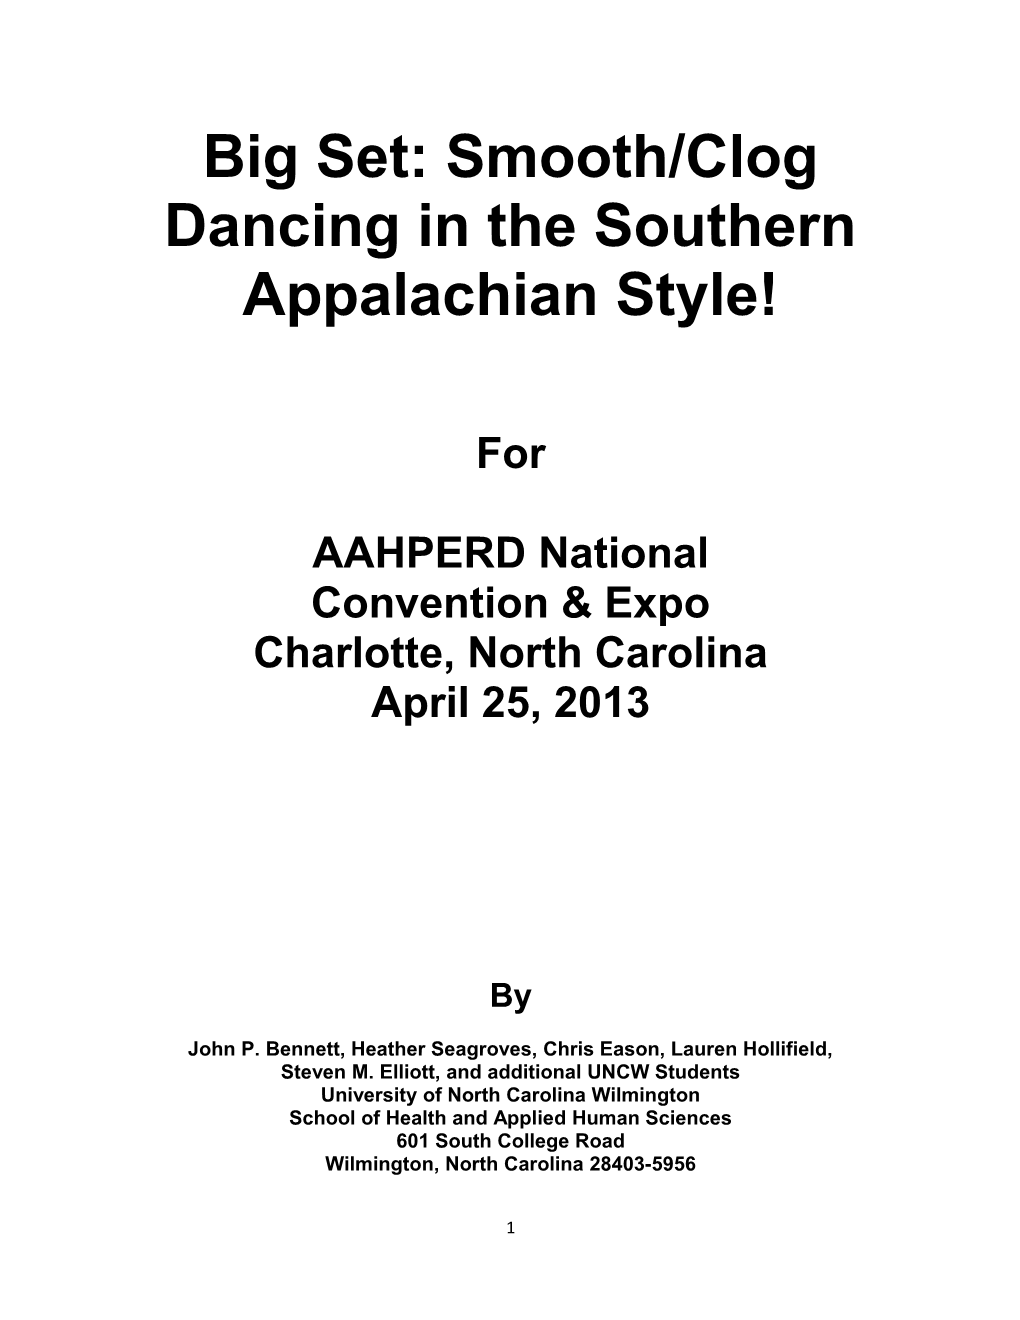 Big Set: Smooth/Clog Dancing in the Southern Appalachian Style!